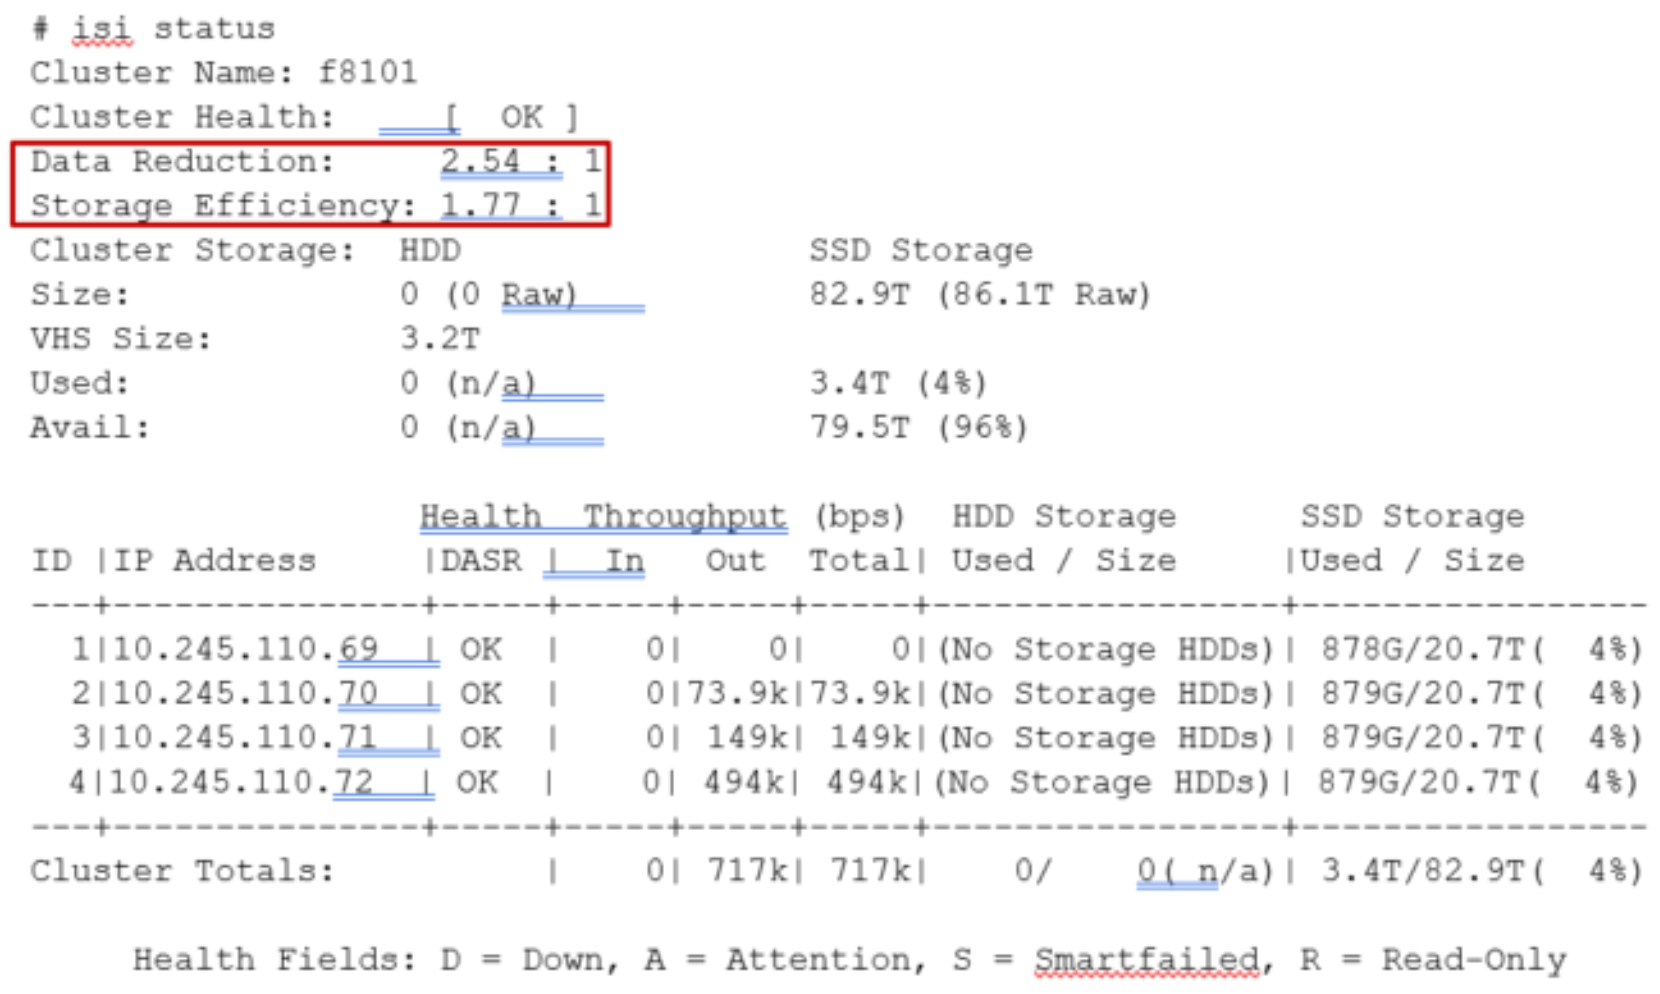 Example output from the ‘isi status’ CLI command showing data reduction and storage efficiency ratios.